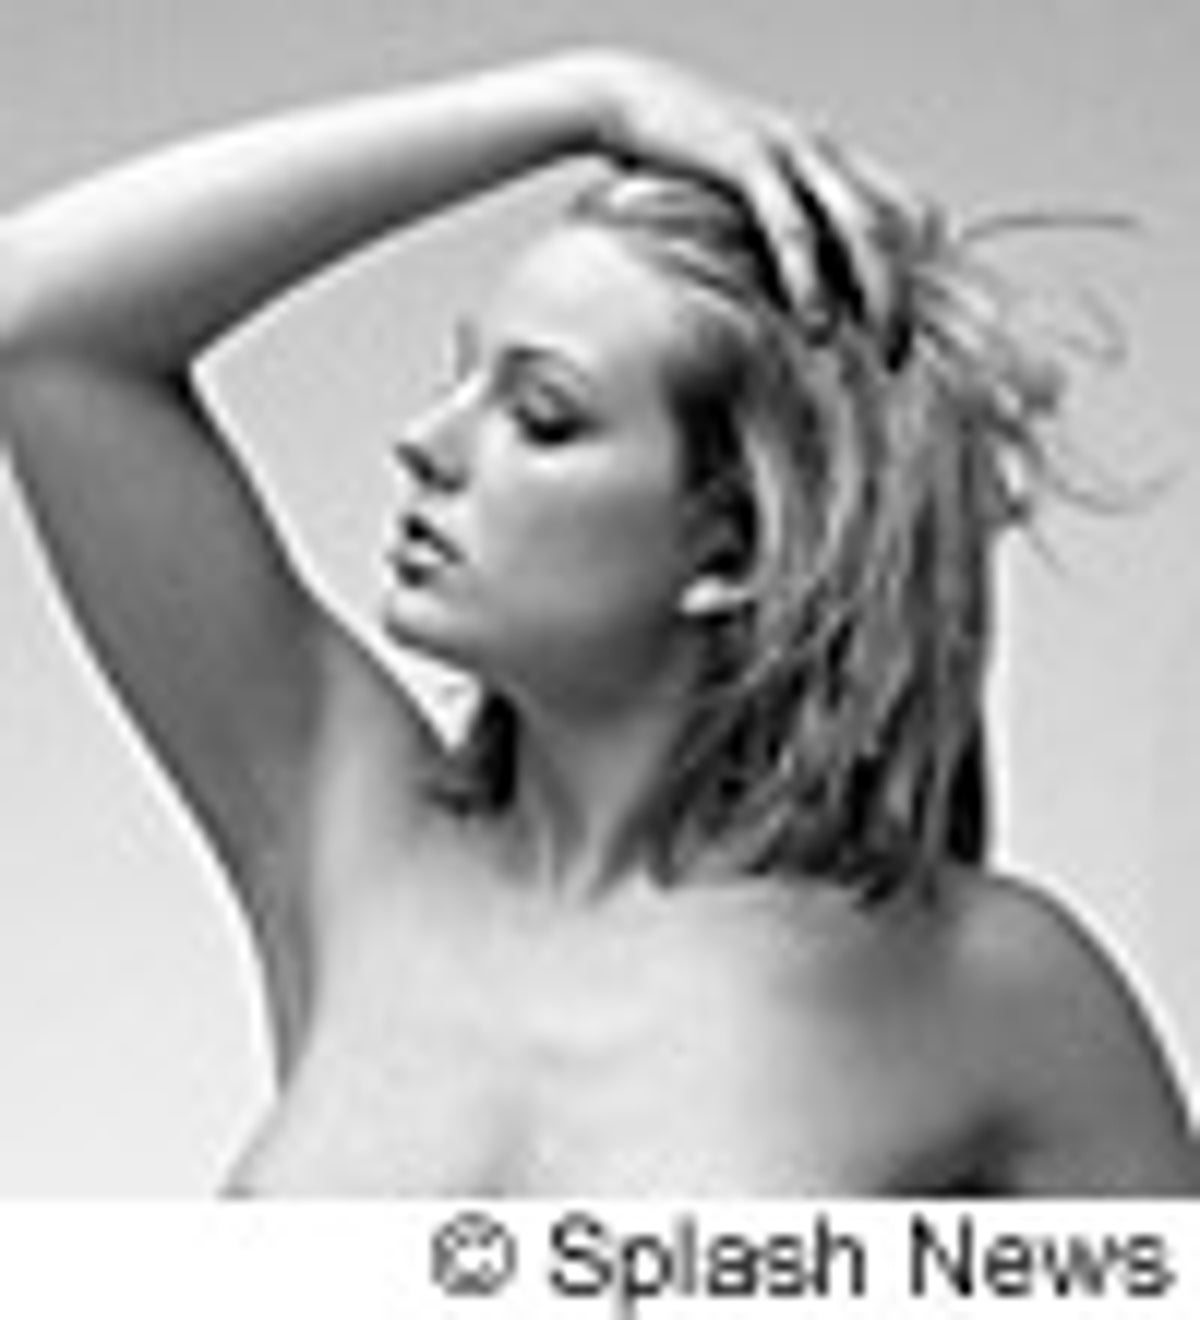 bruce shaeffer recommends britney spears playboy photos pic